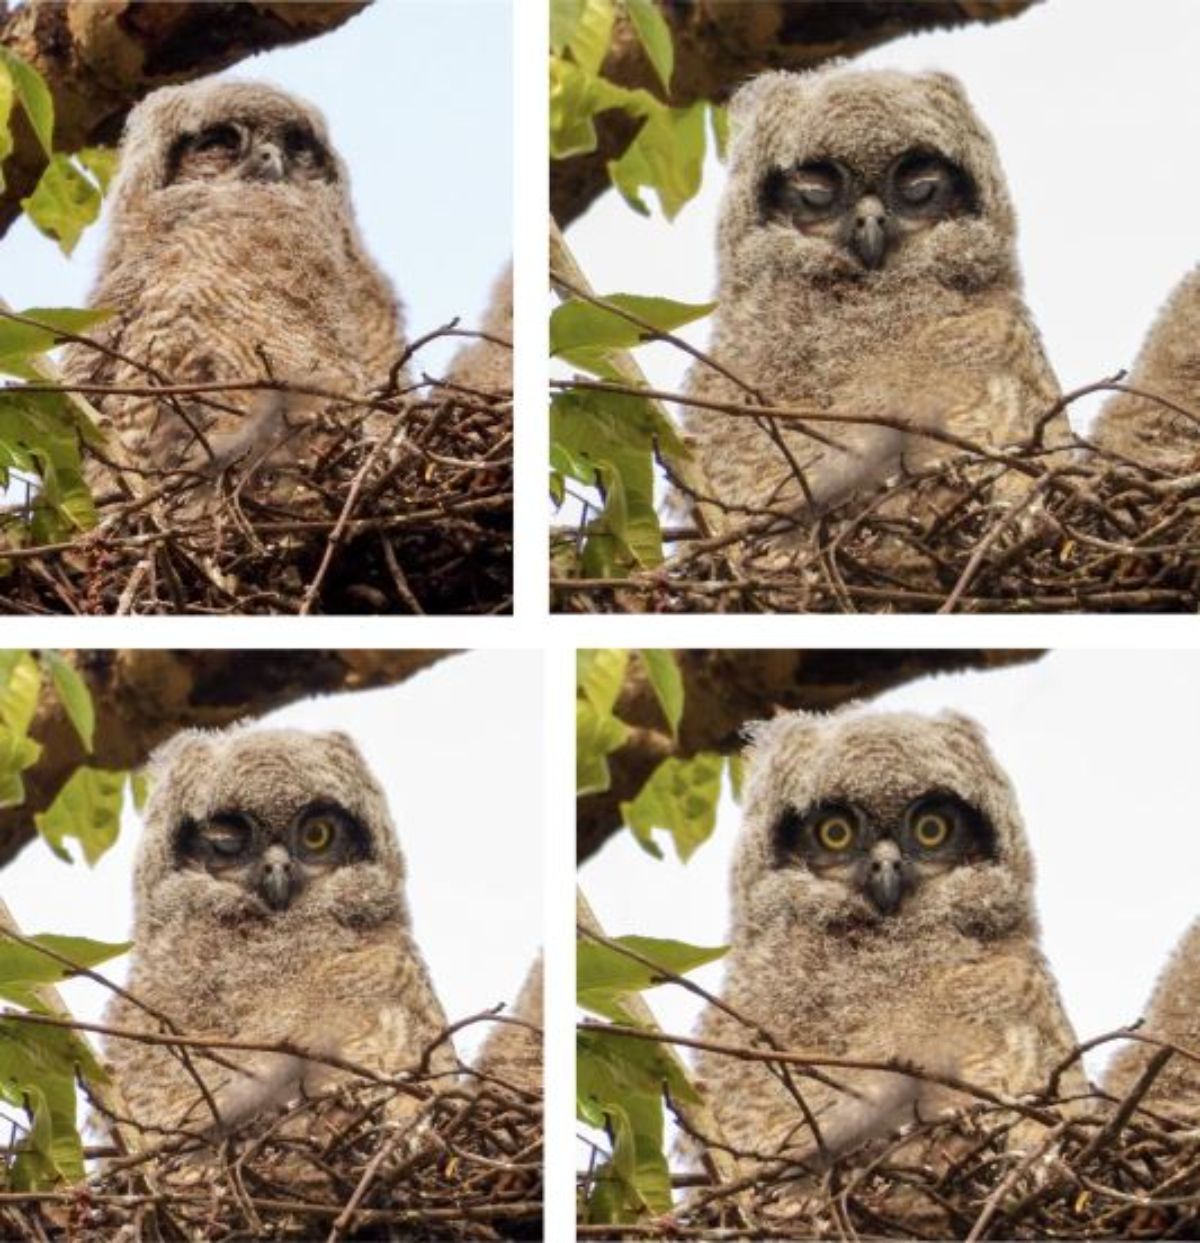 4 photos of a brown and black owlet sitting in a nest